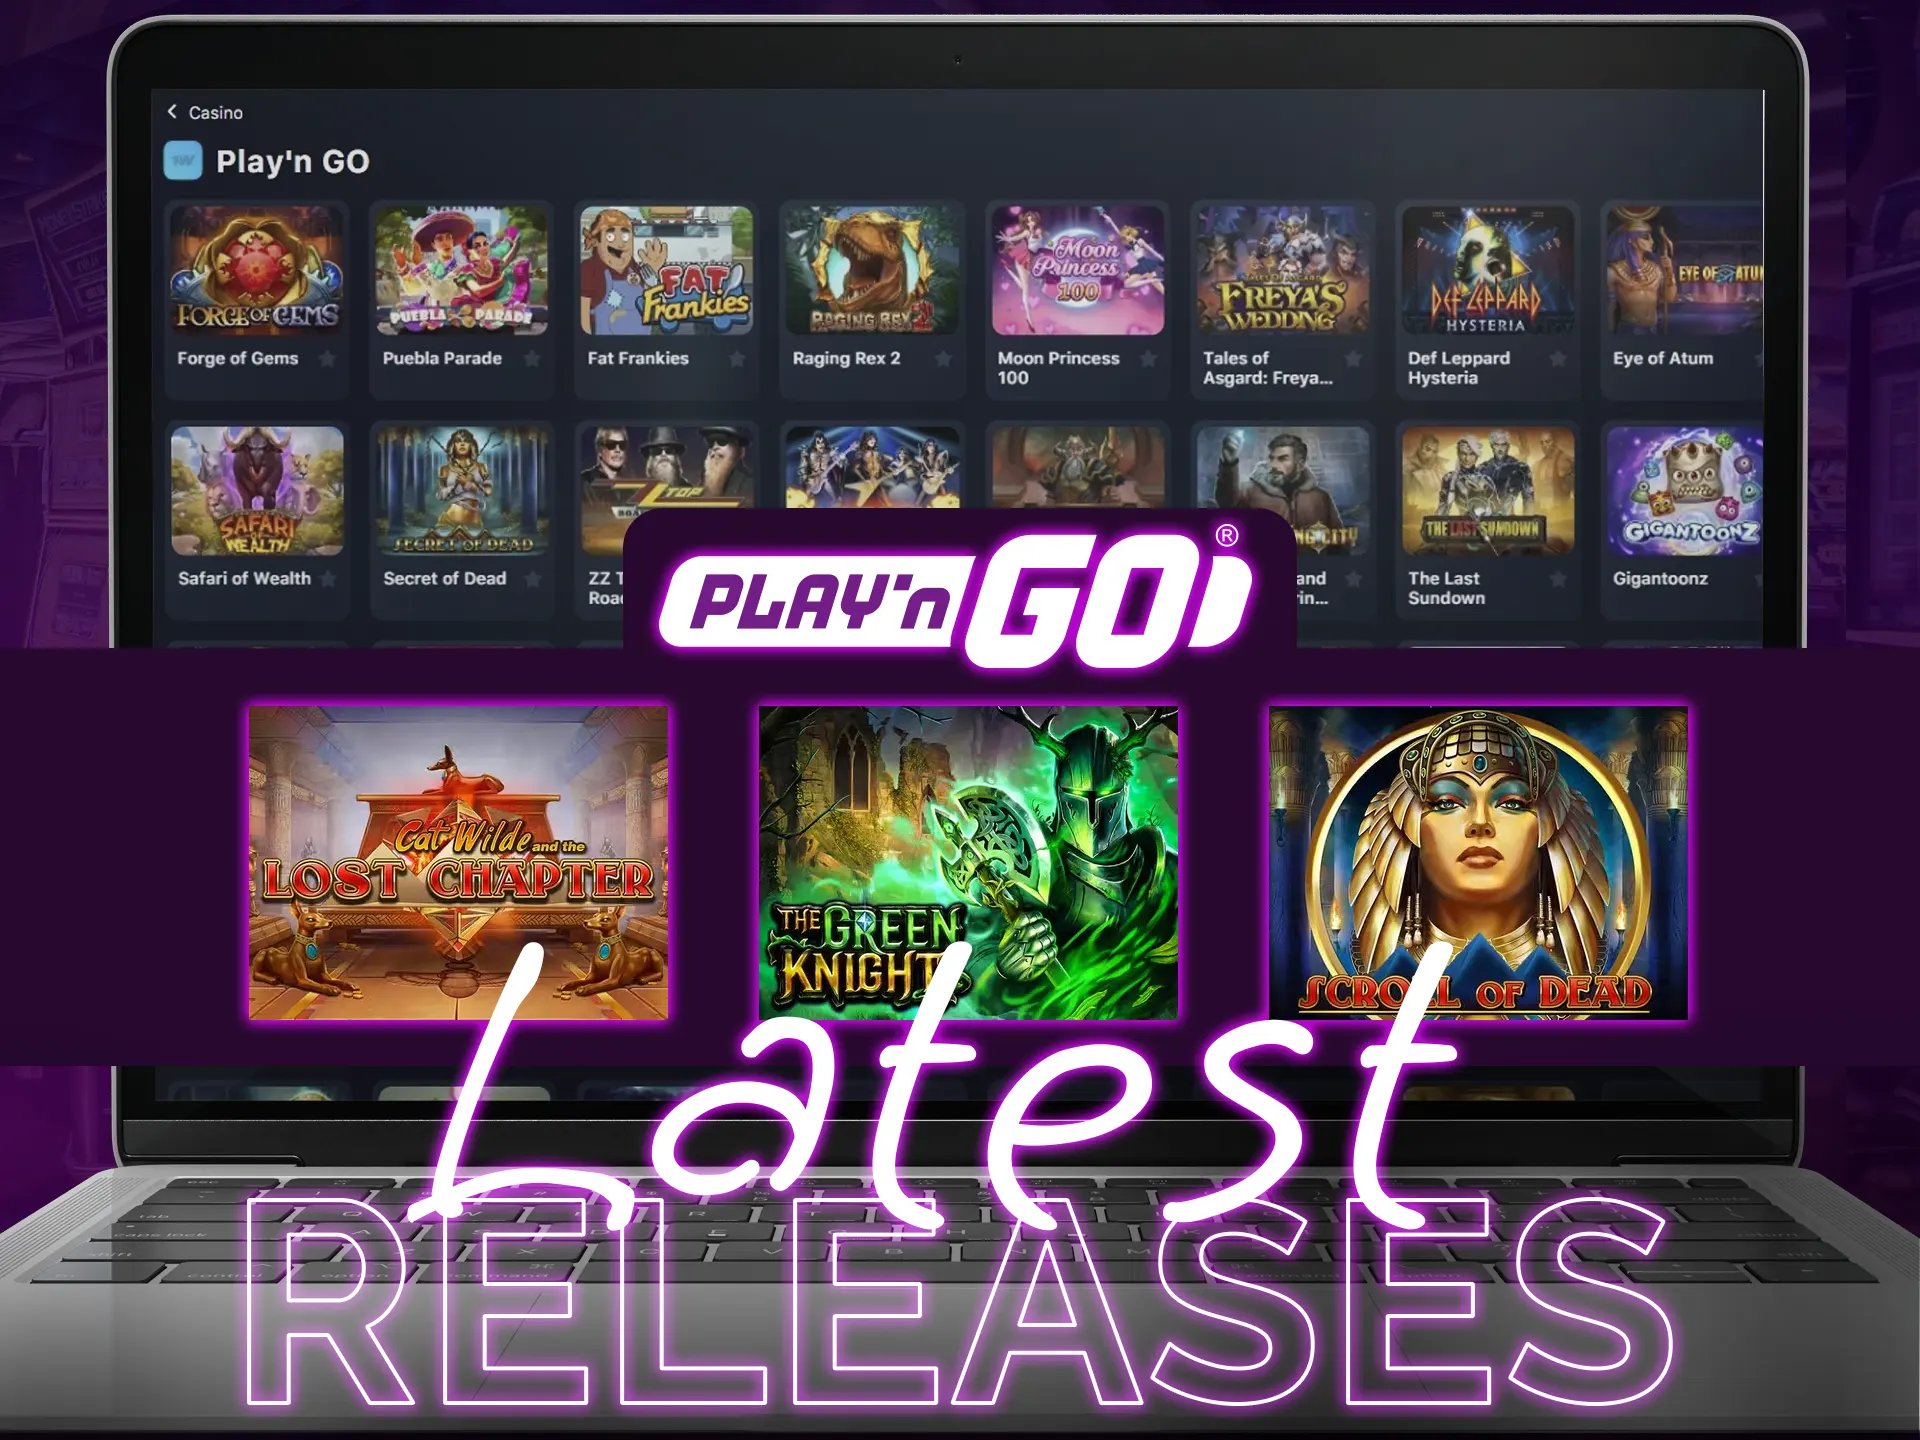 Check out the latest releases from Play'n Go.